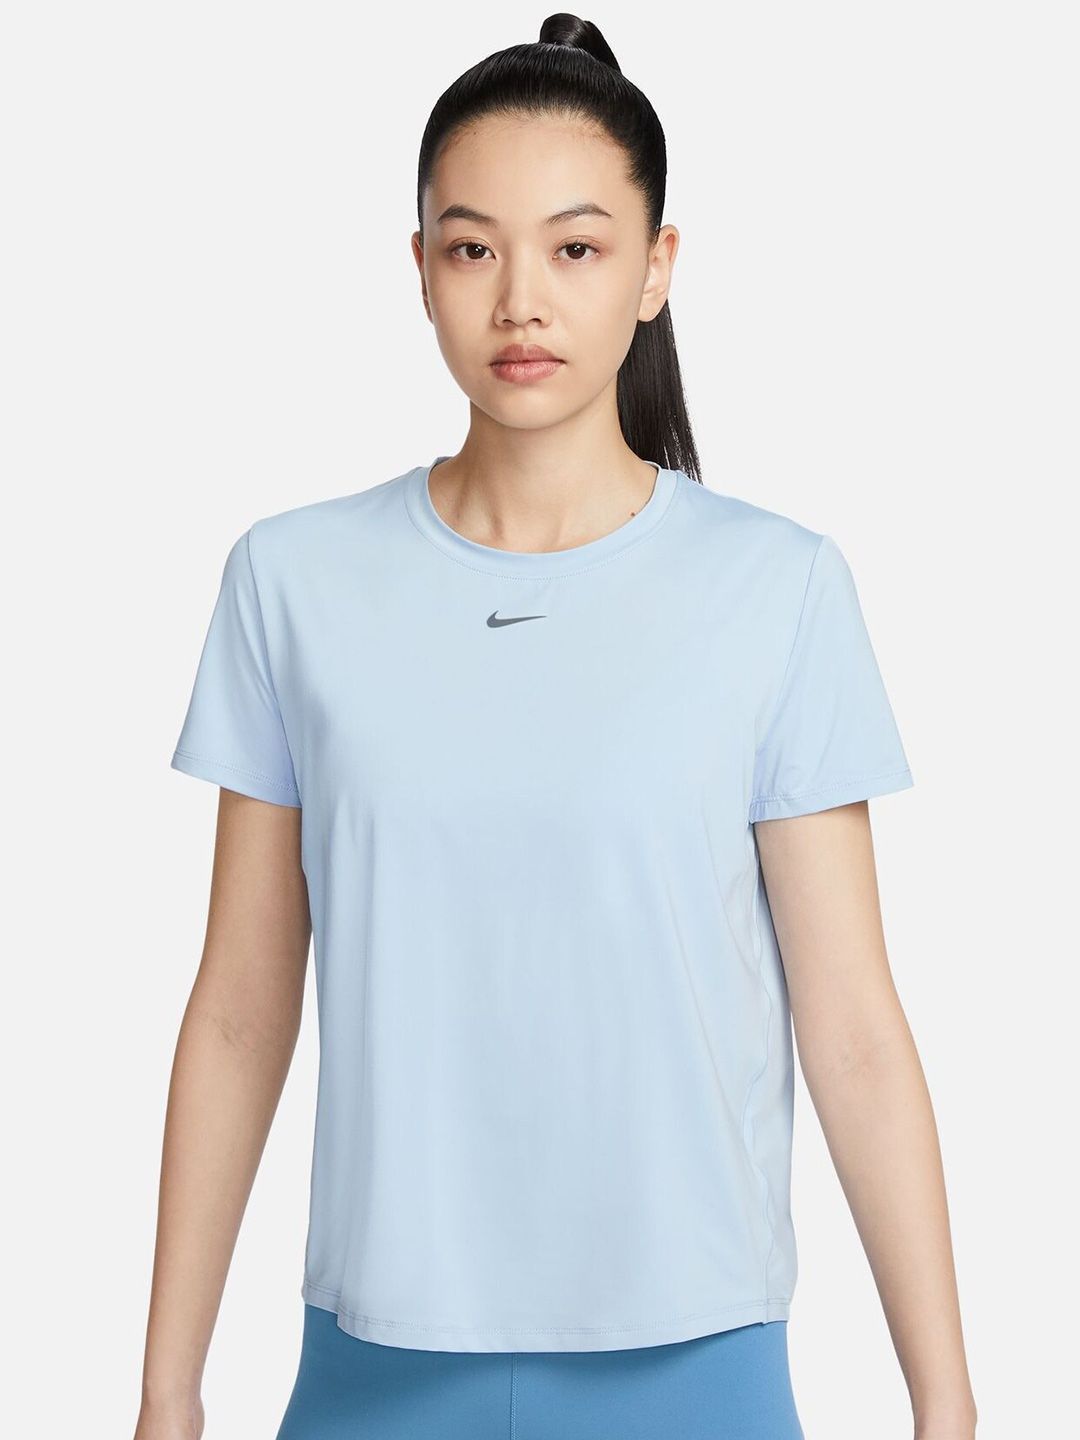 Nike One Classic Dri-Fit Short-Sleeve Top Price in India